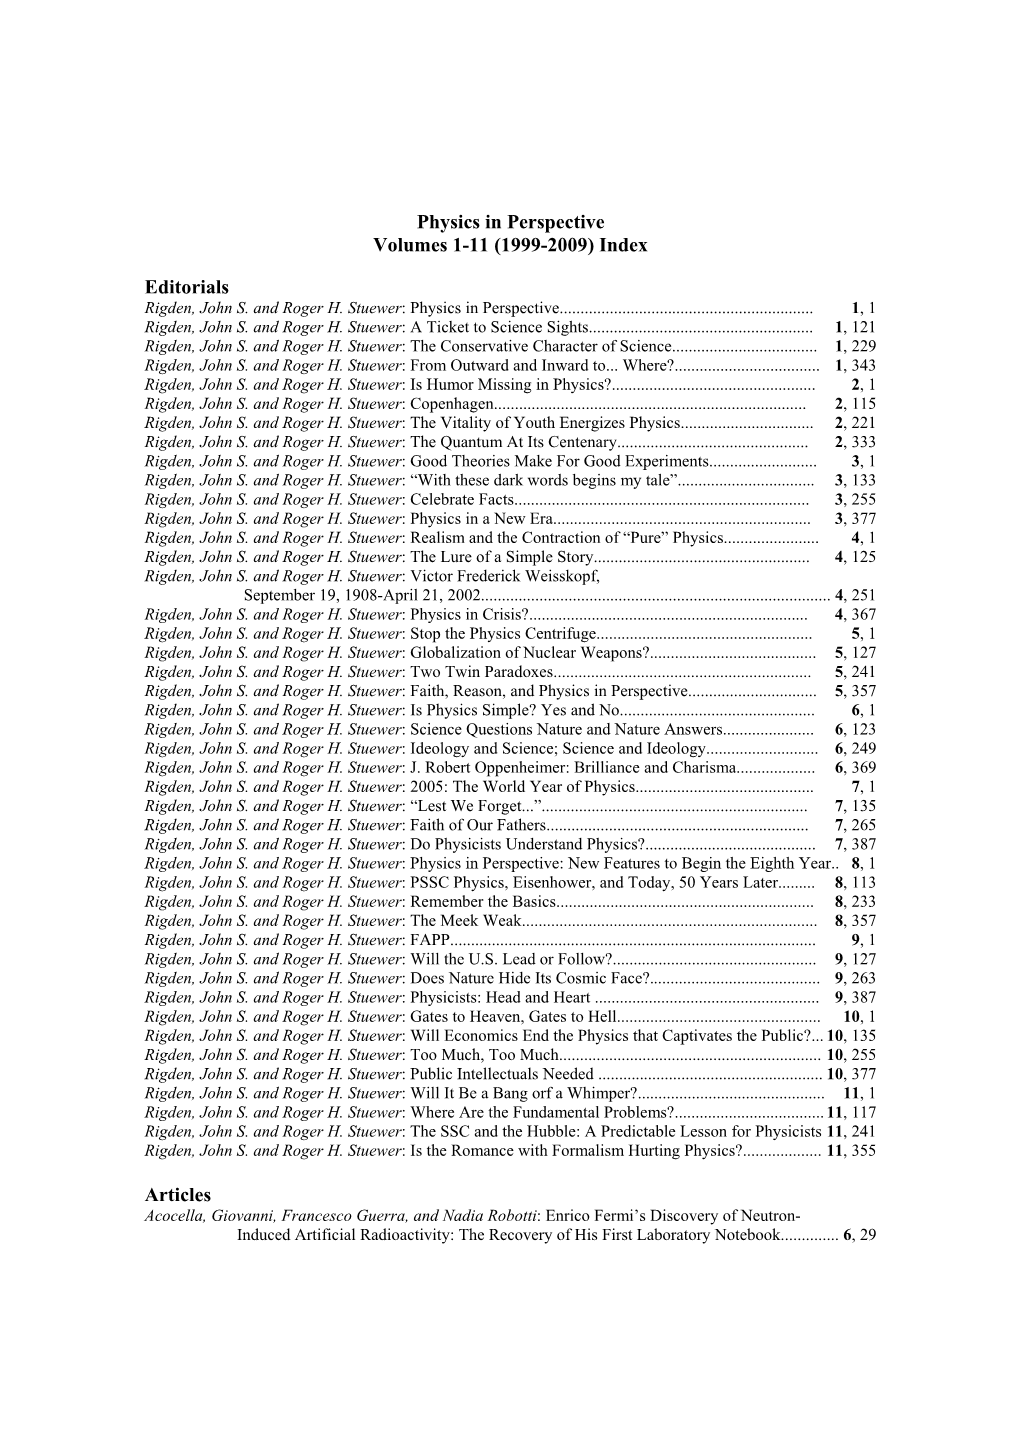 Physics in Perspective Volumes 1-11 (1999-2009) Index